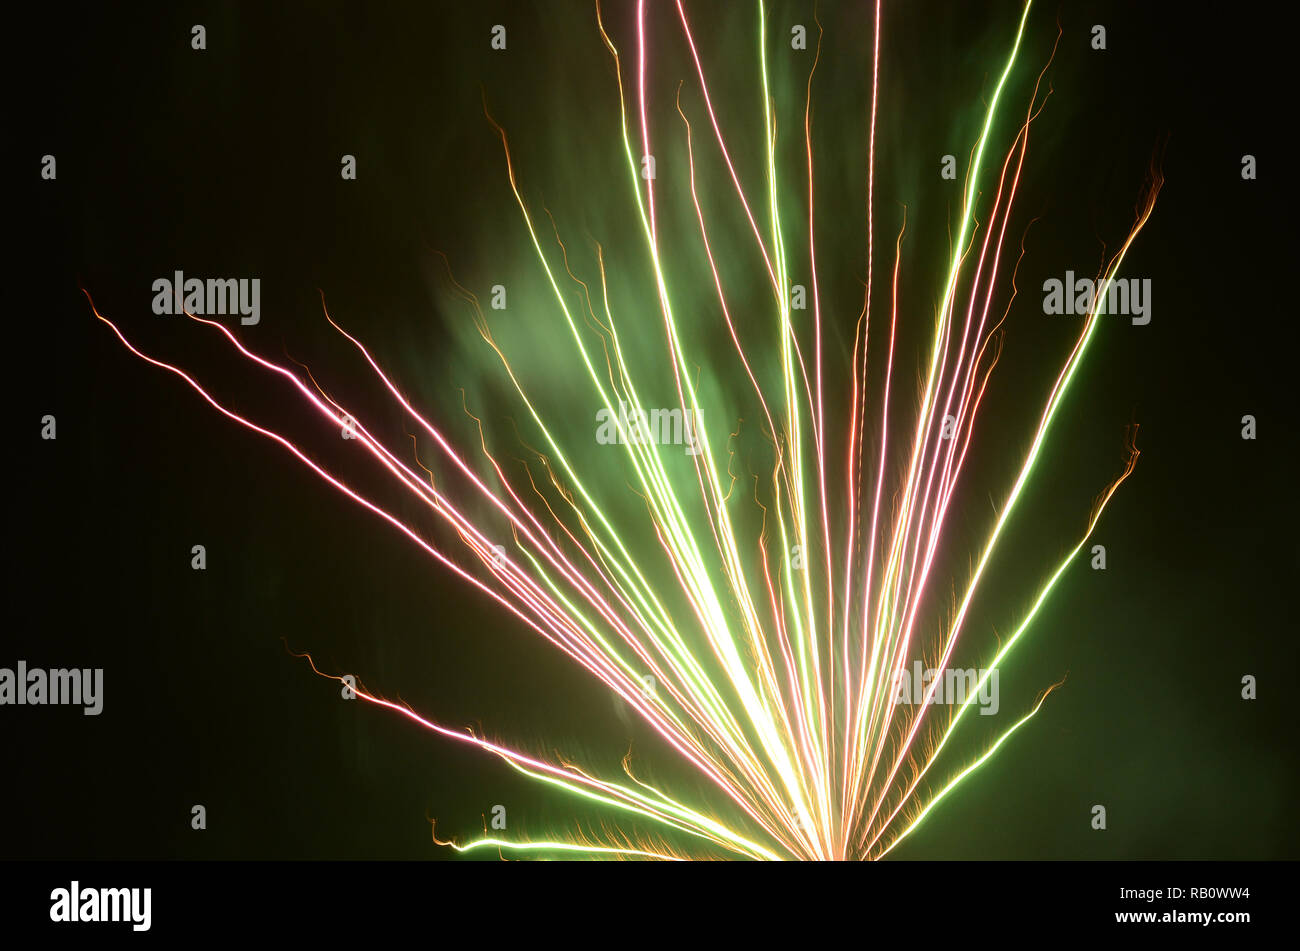 Firework flower structure with red and green colors. Stock Photo